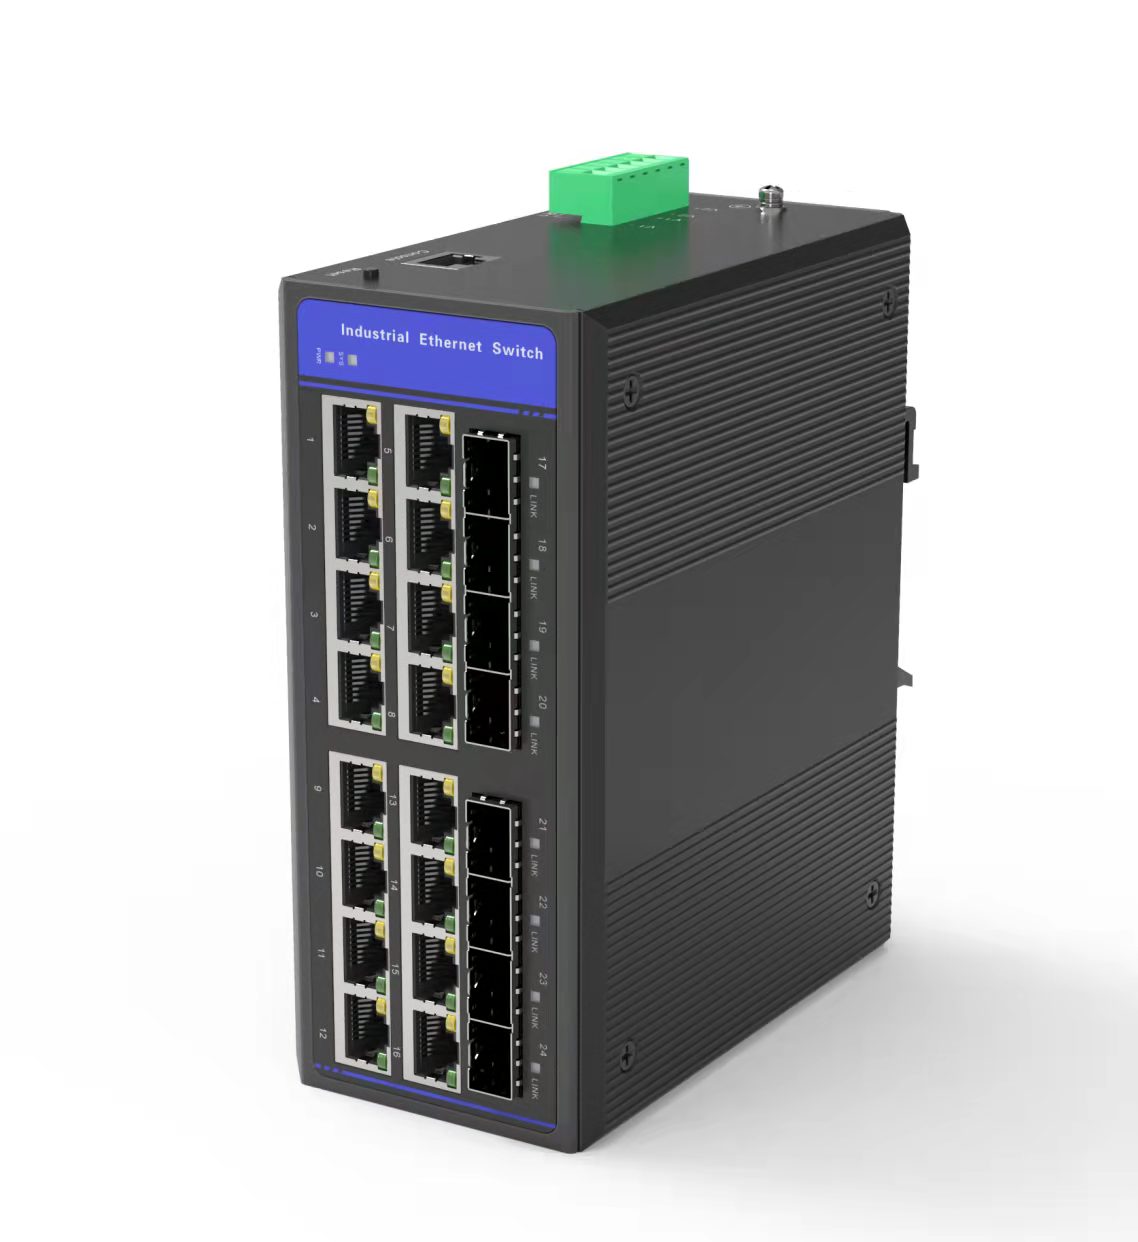 TH-G524 Industrial Ethernet Switch